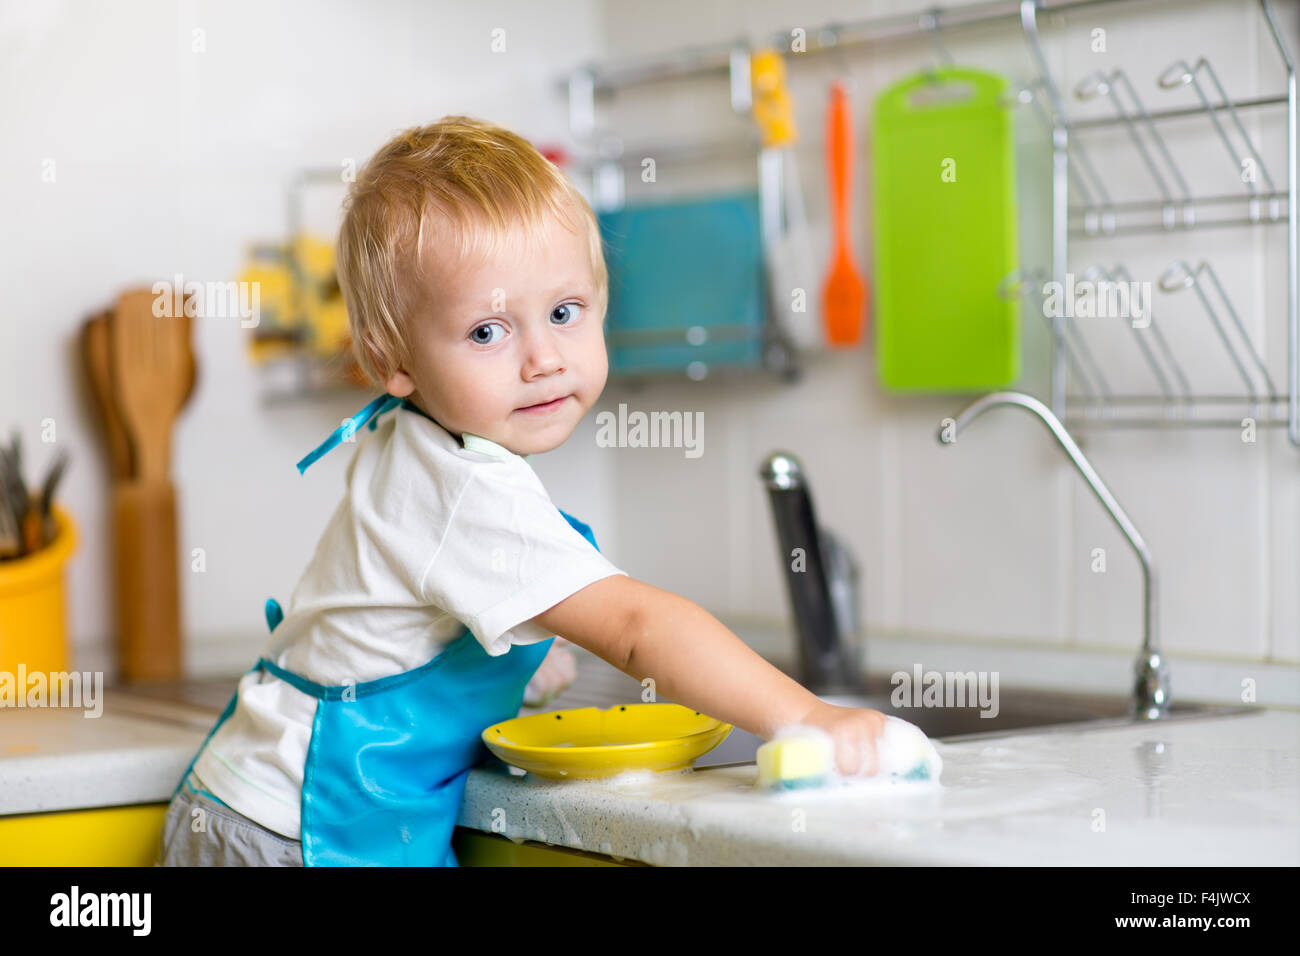 Child washing dishes in a domestic kitchen Stock Photo